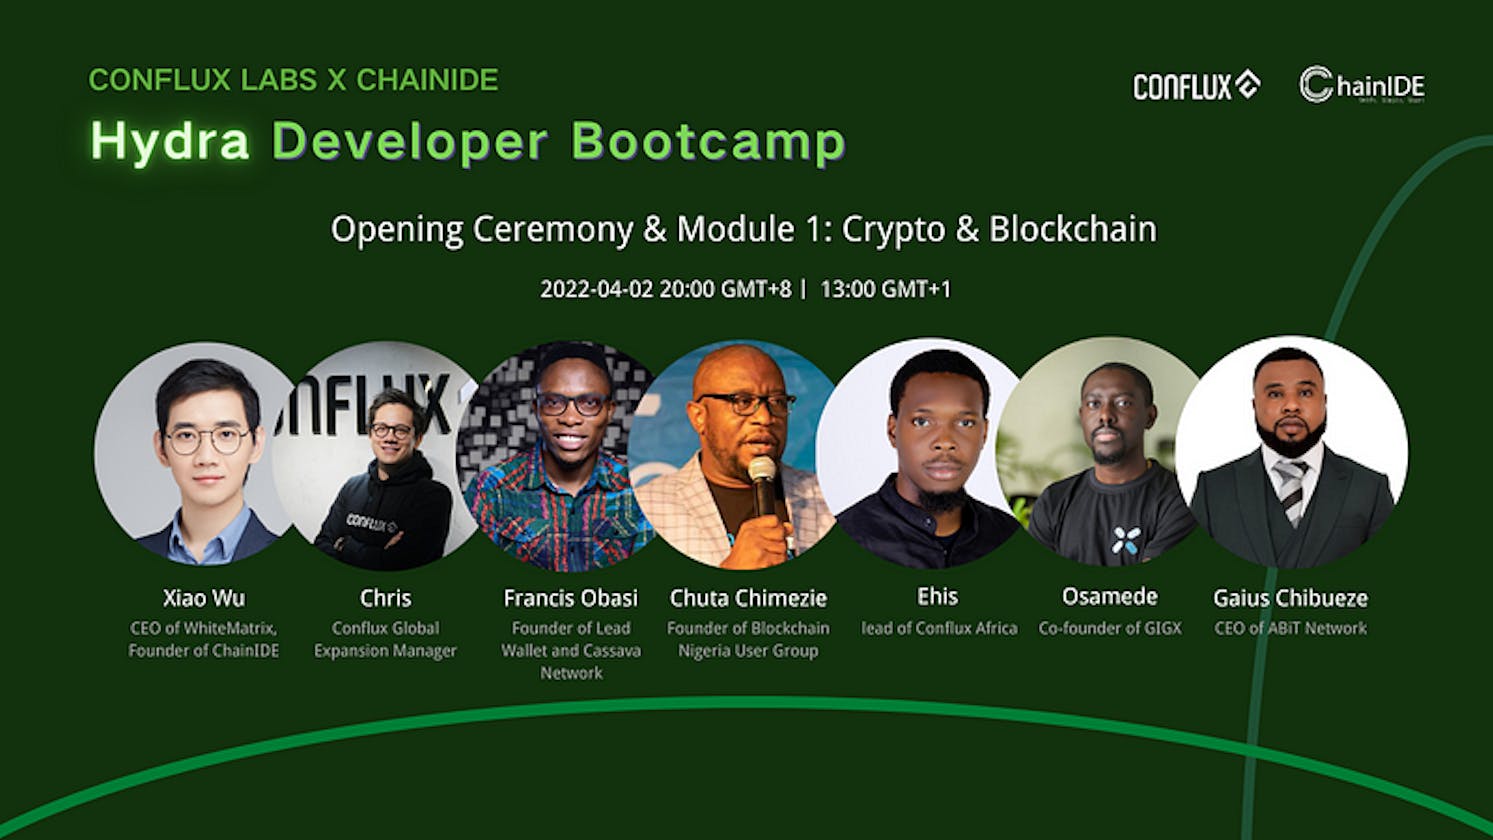 Conflux Labs x ChainIDE Hydra Developer Bootcamp with Over $7,000 Prize Pool